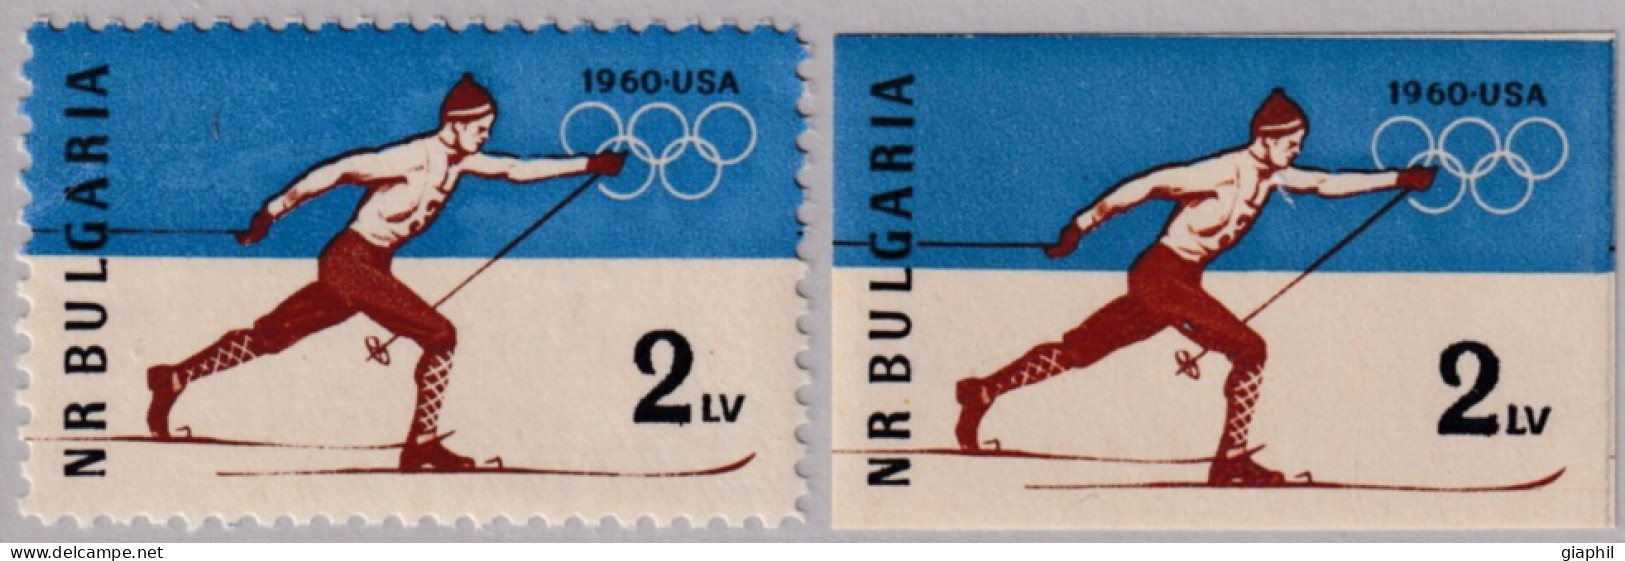 BULGARIA BULGARIE 1960 SQUAW VALLEY OLYMPIC GAMES SET (Mi 1152A-1152B) MNH ** OFFER! - Hiver 1960: Squaw Valley